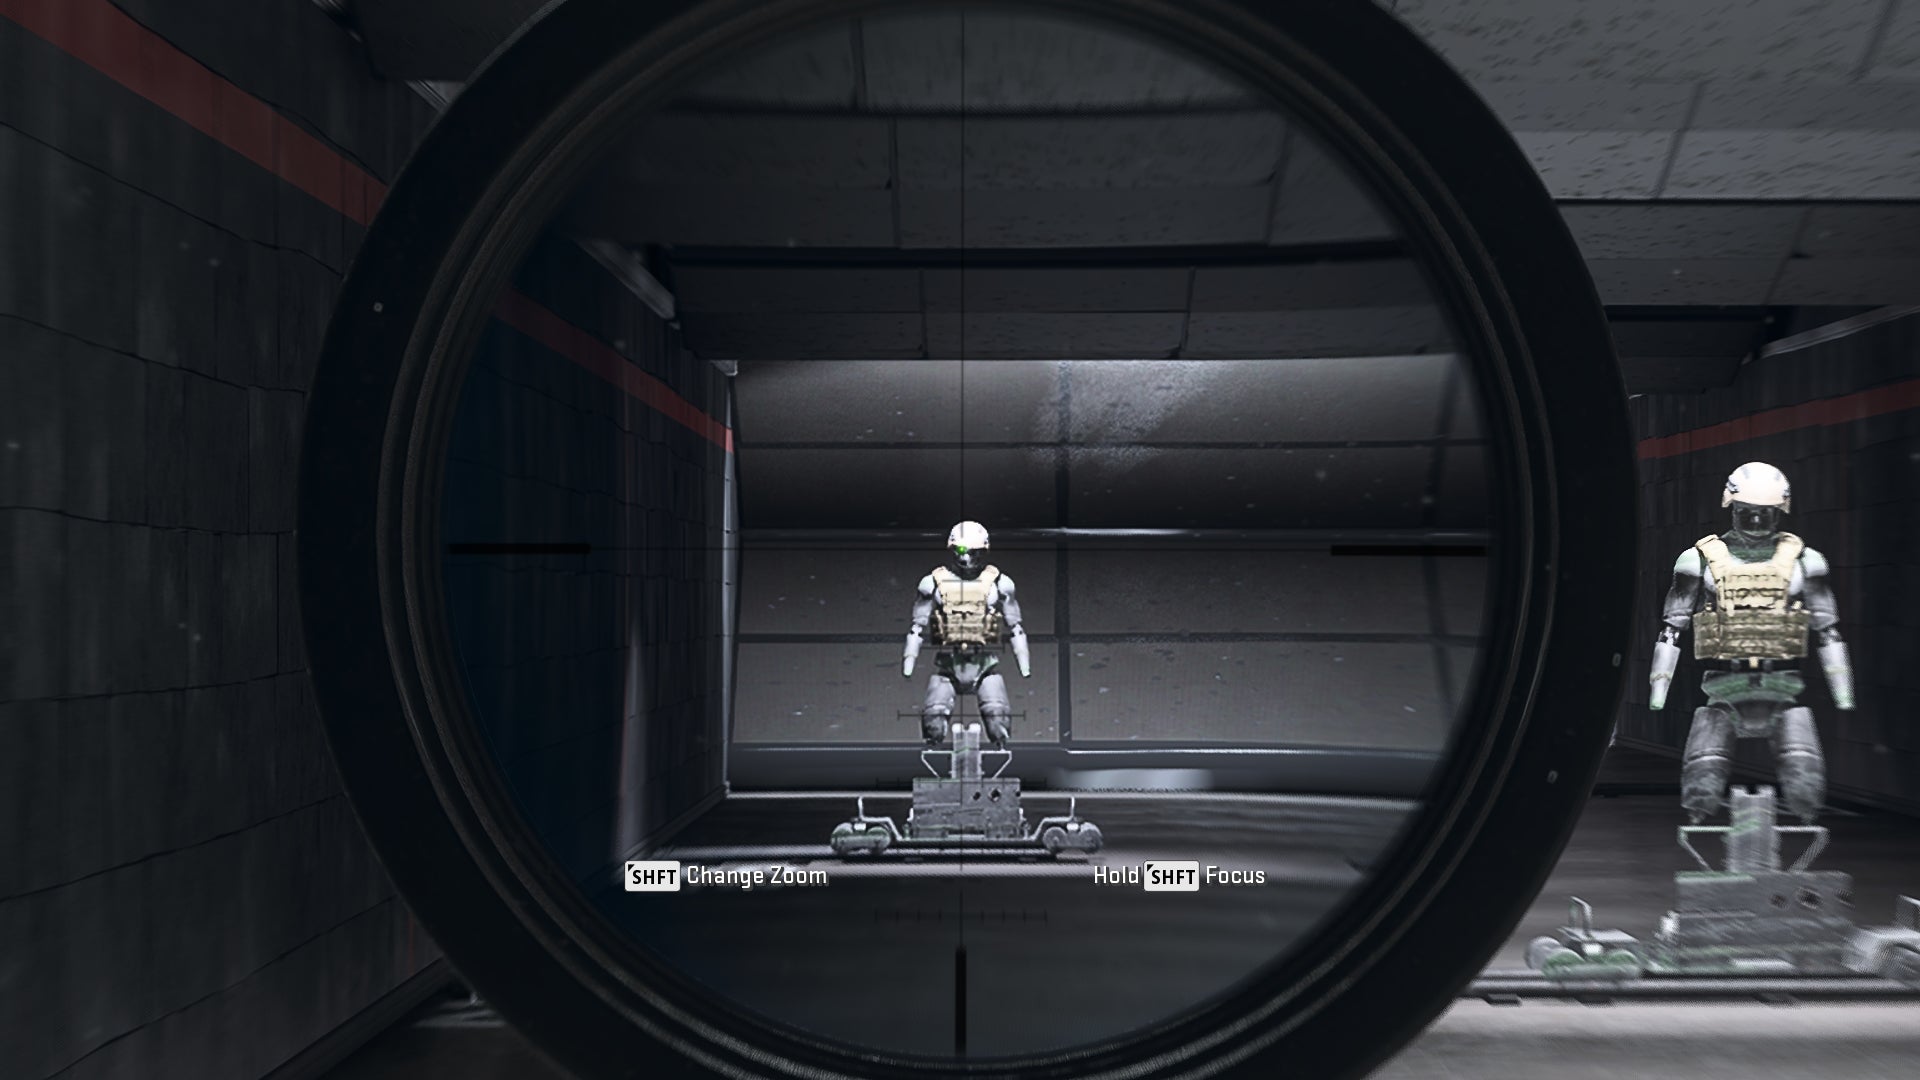 The player in Warzone 2.0 aims at a training dummy using the FTAC Locus SP optic attachment.